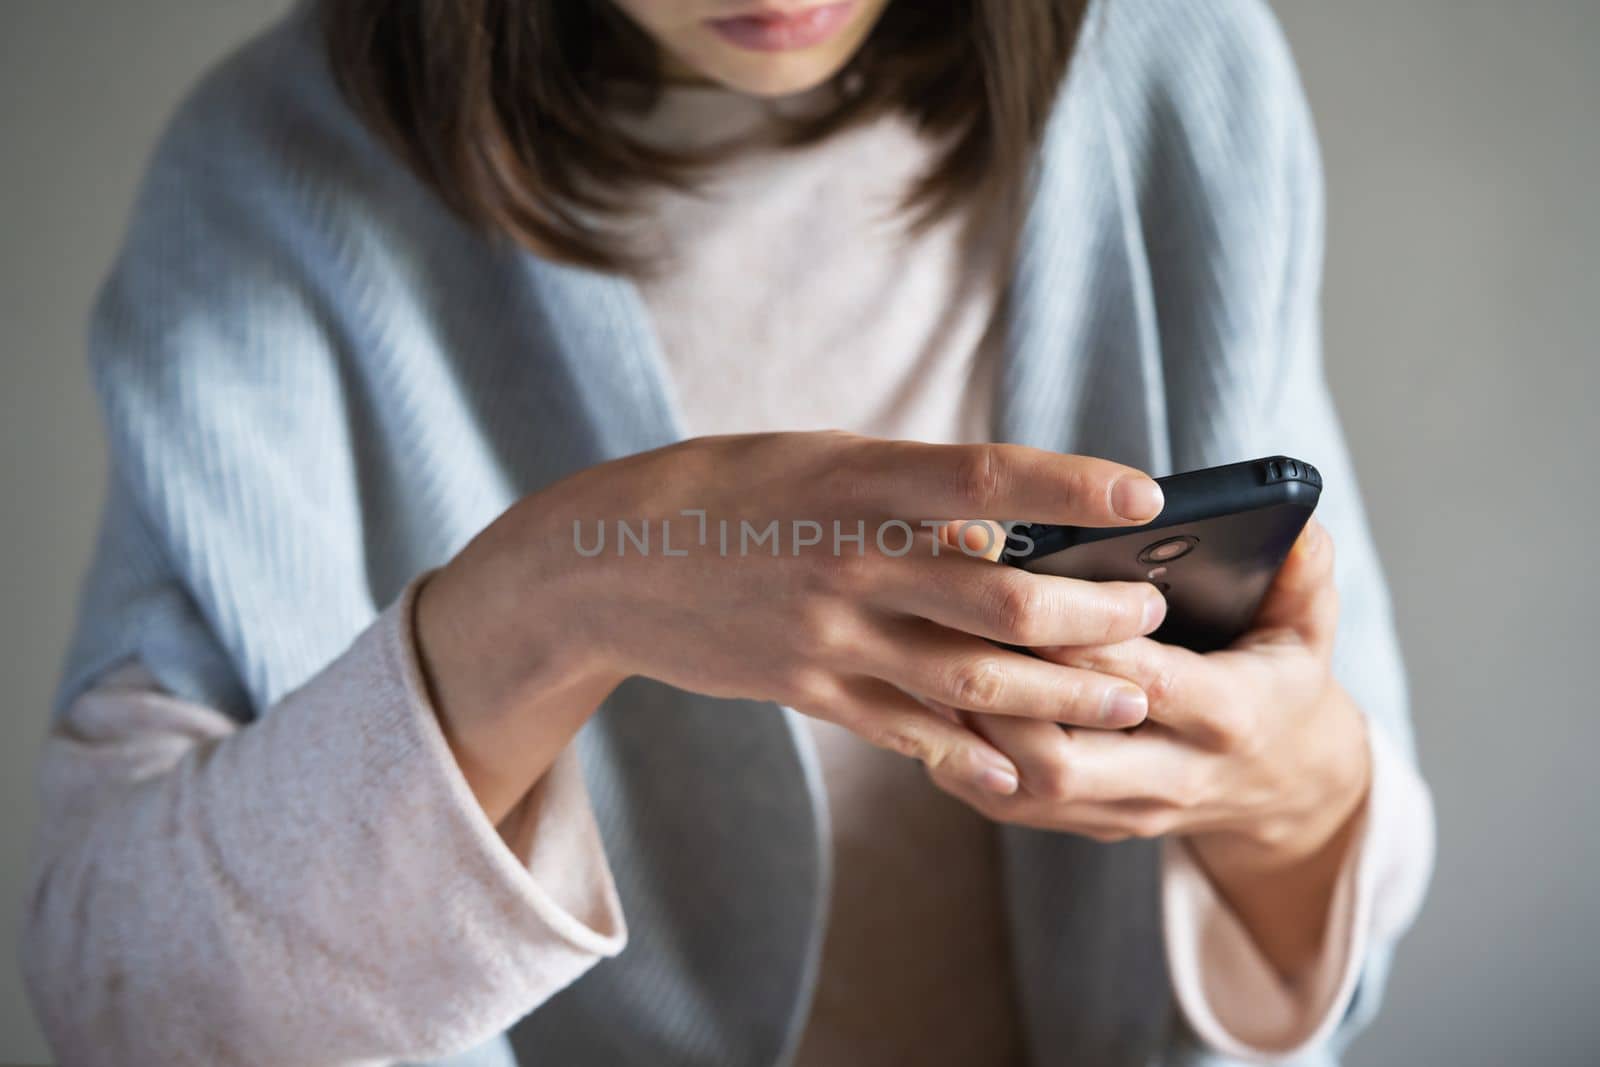 A young girl holds a mobile phone in her hands, sends SMS, chats in social networks, develops her business. A woman uses a smartphone online, close-up view.